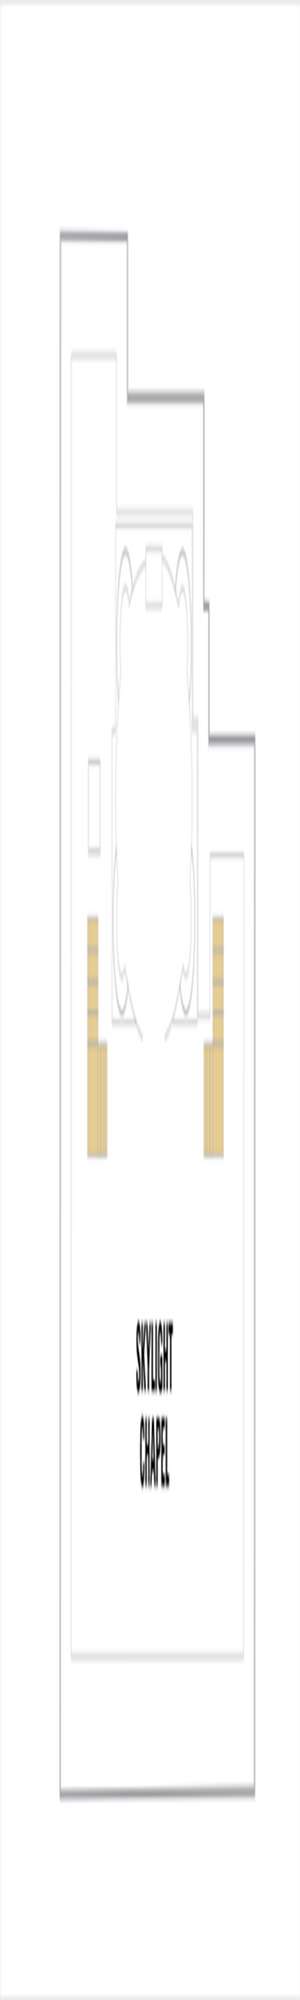 Deck plan for Liberty of the Seas